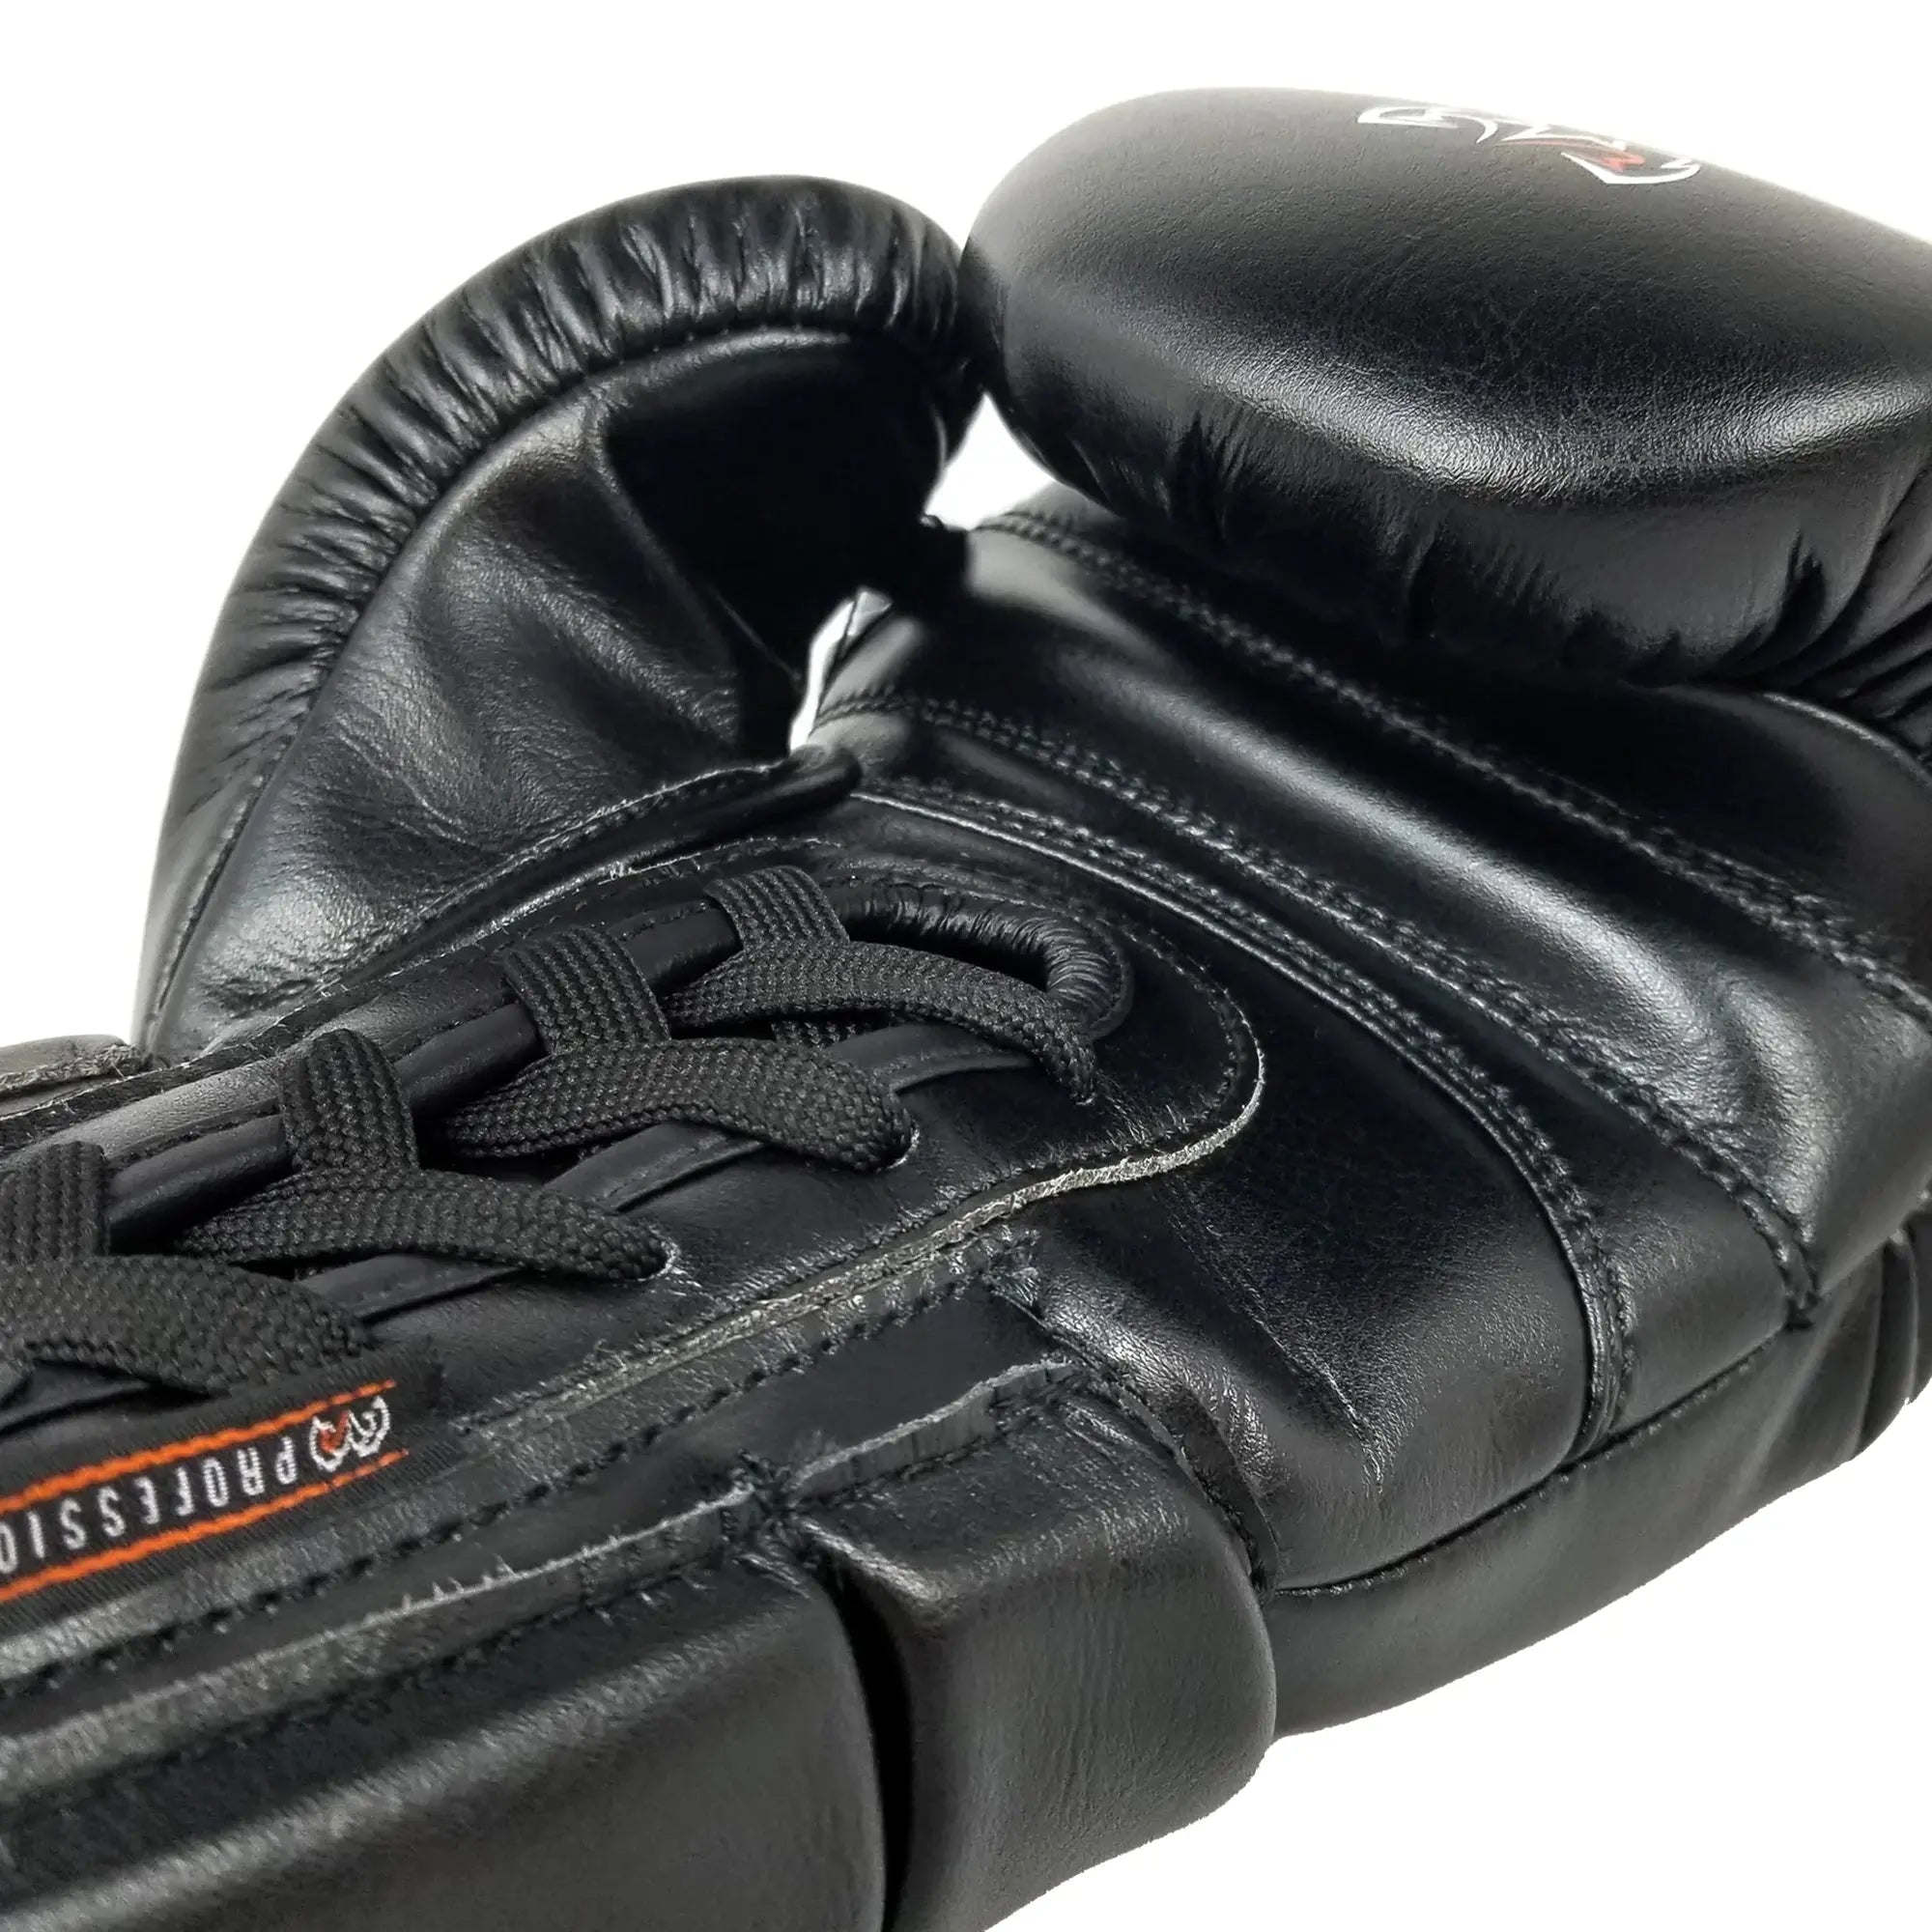 RIVAL Boxing RS1 2.0 Ultra Pro Lace-Up Sparring Gloves